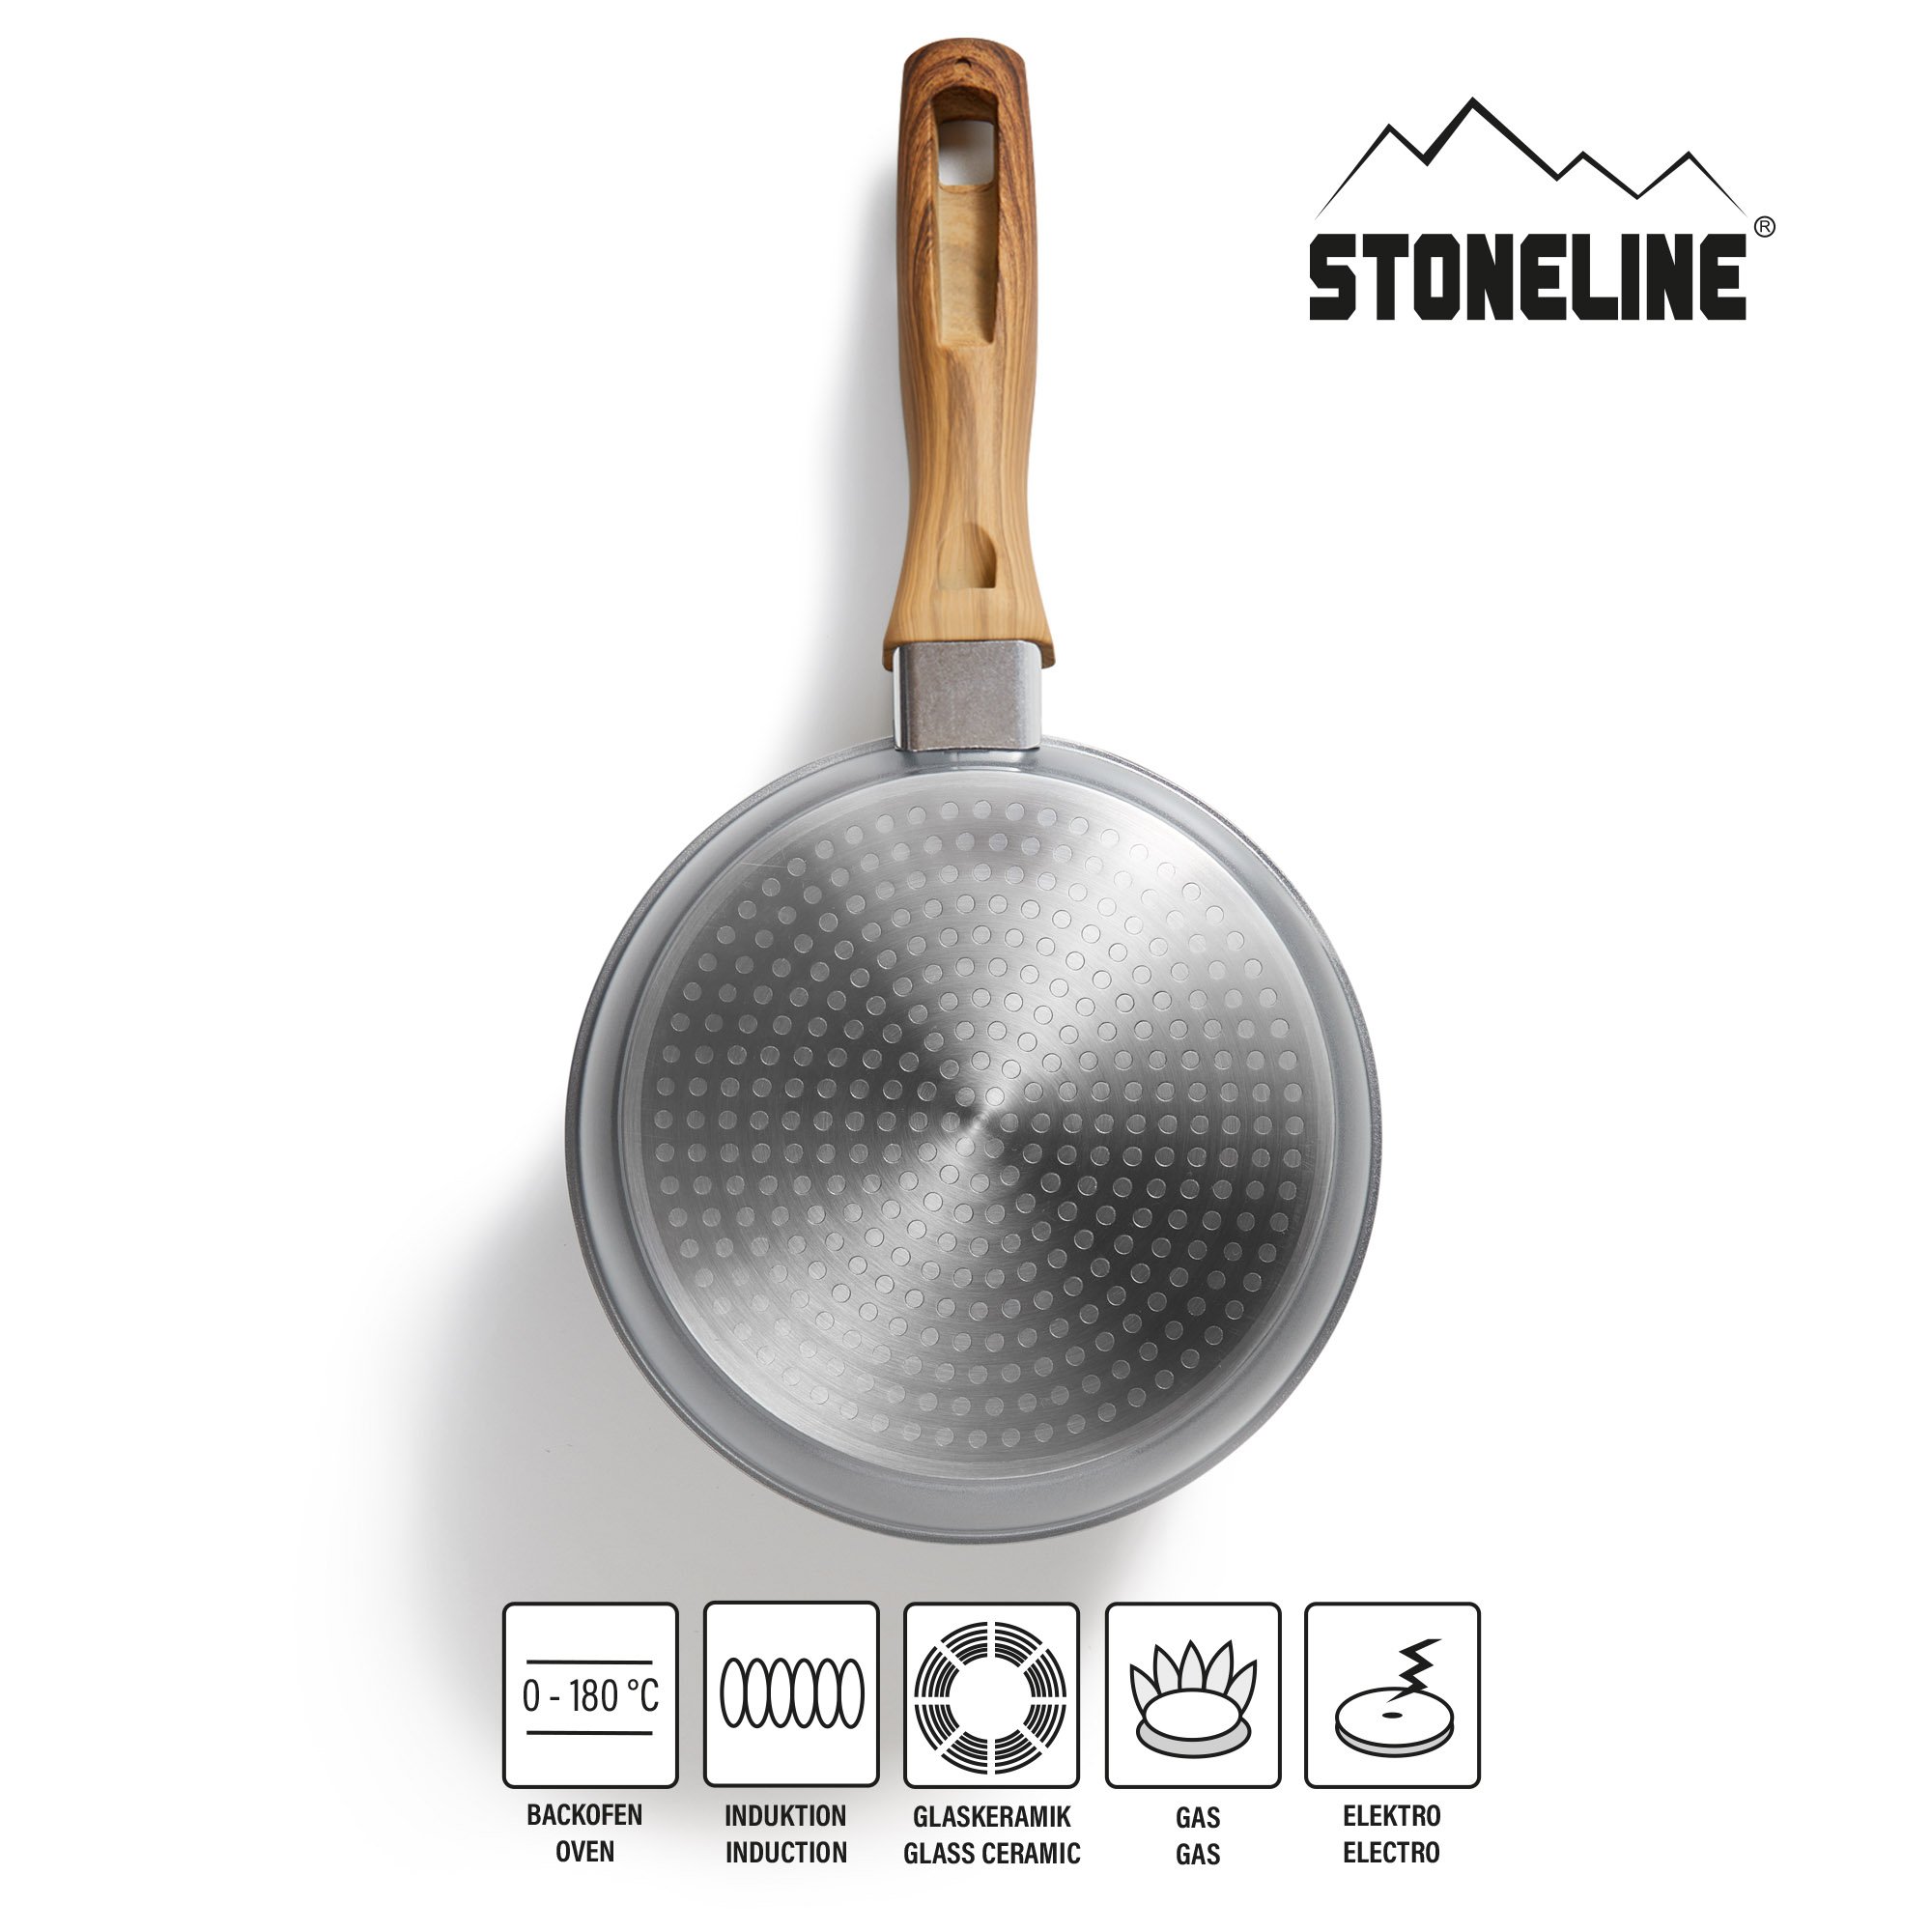 STONELINE® Frying Pan 18 cm, Non-Stick Pan, Wood Design | Back to Nature